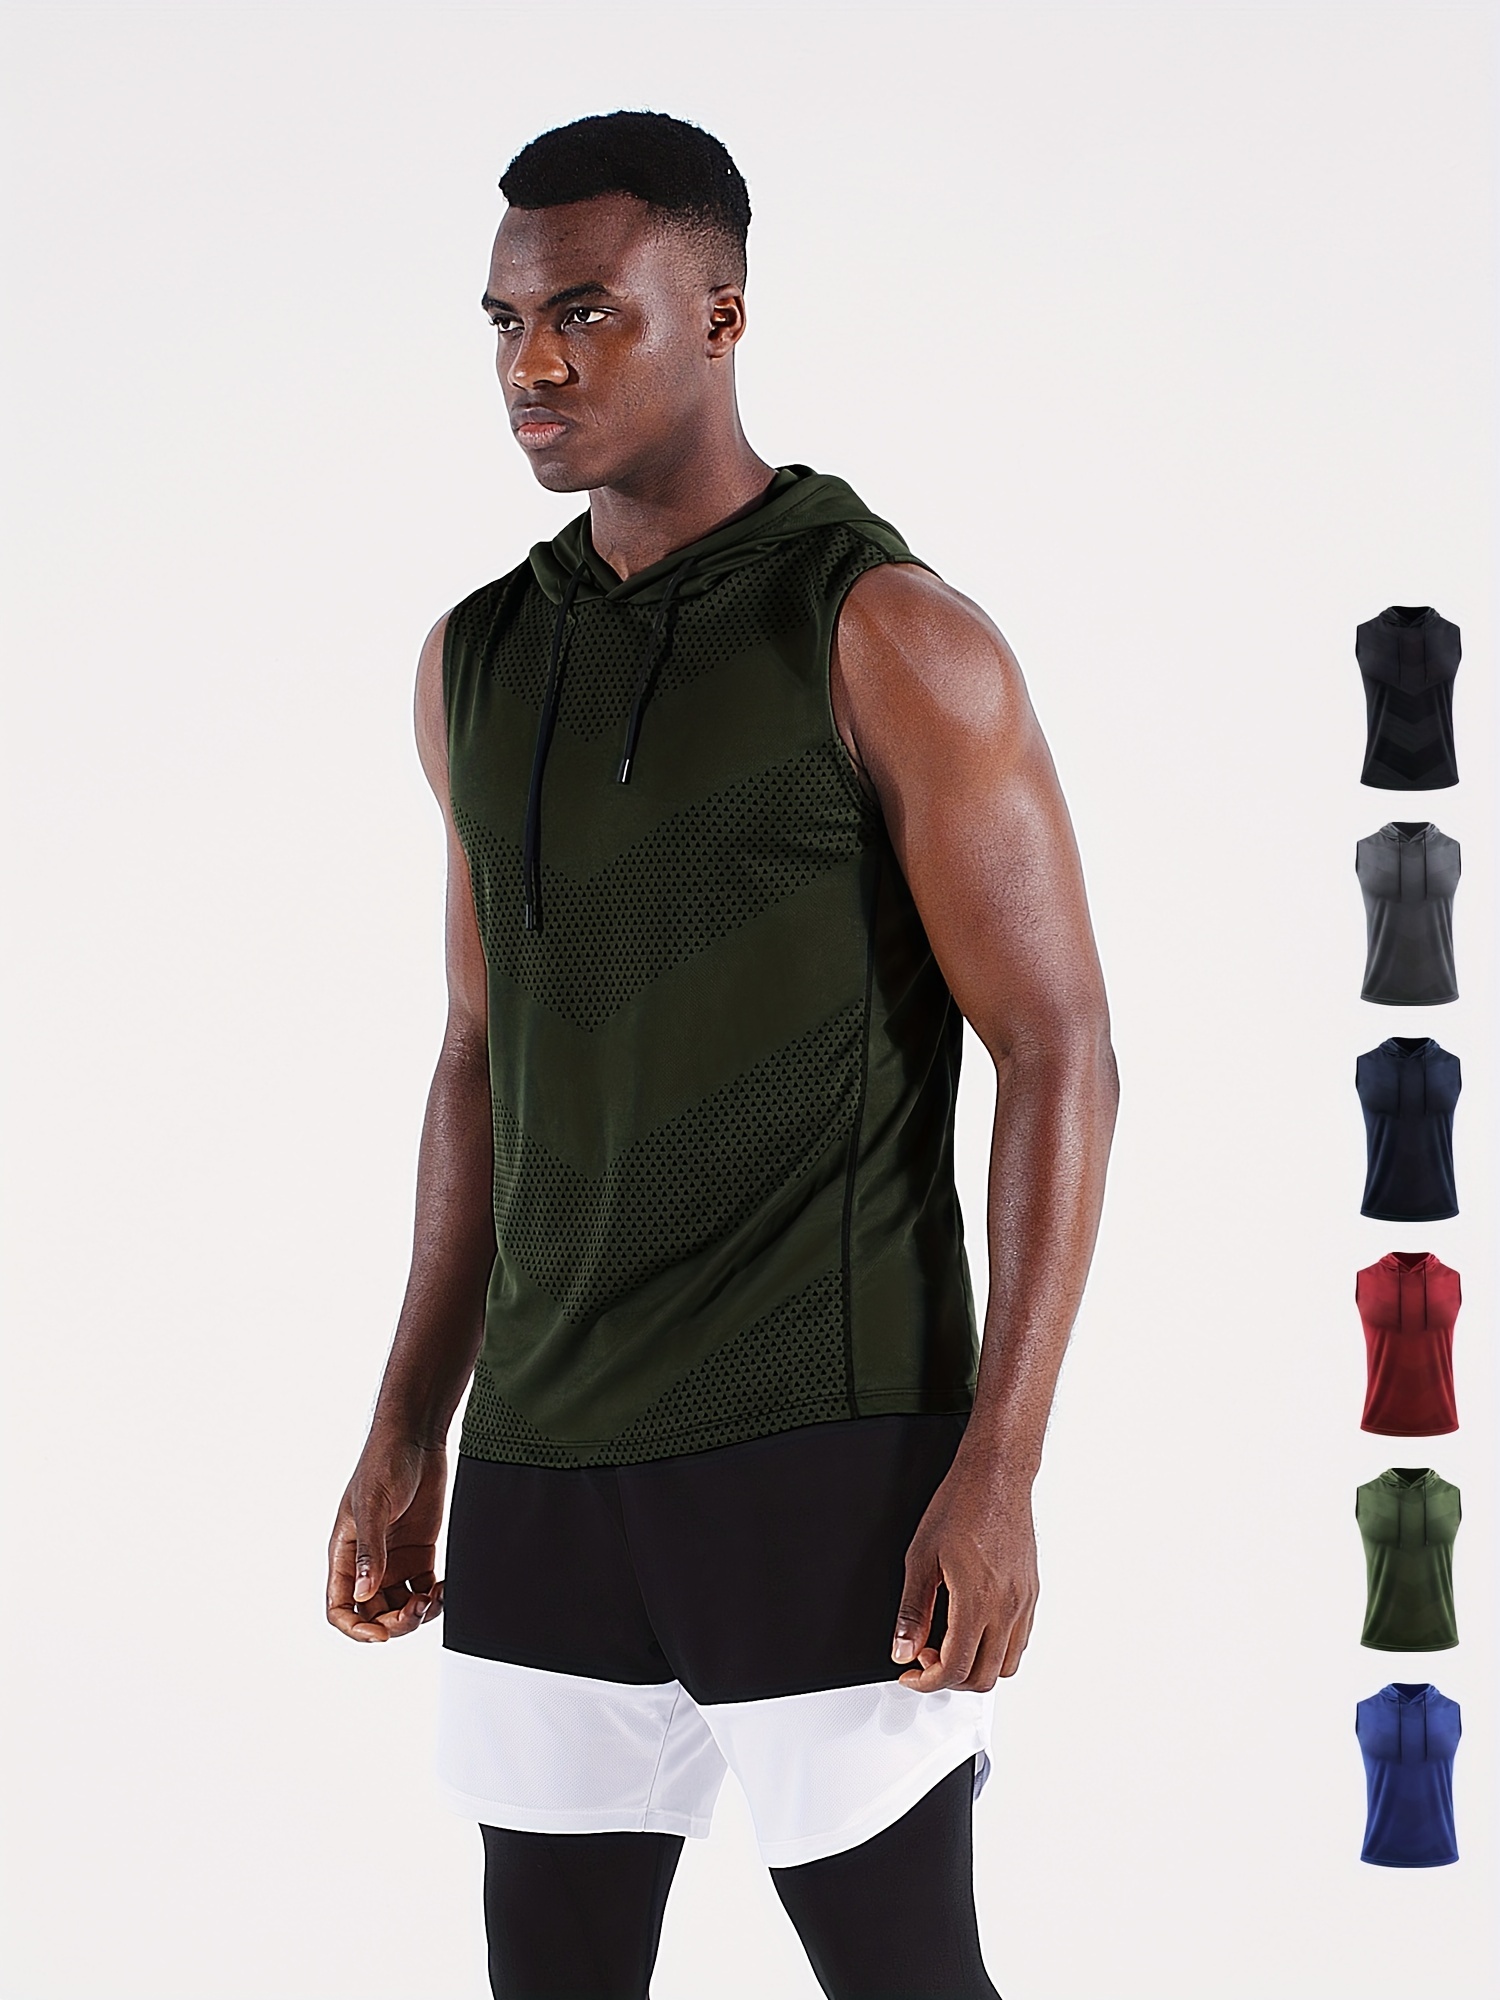 Mens Sleeveless Vest Tank Top Training Gym Sports Muscle Sports T-Shirt  Camisole 